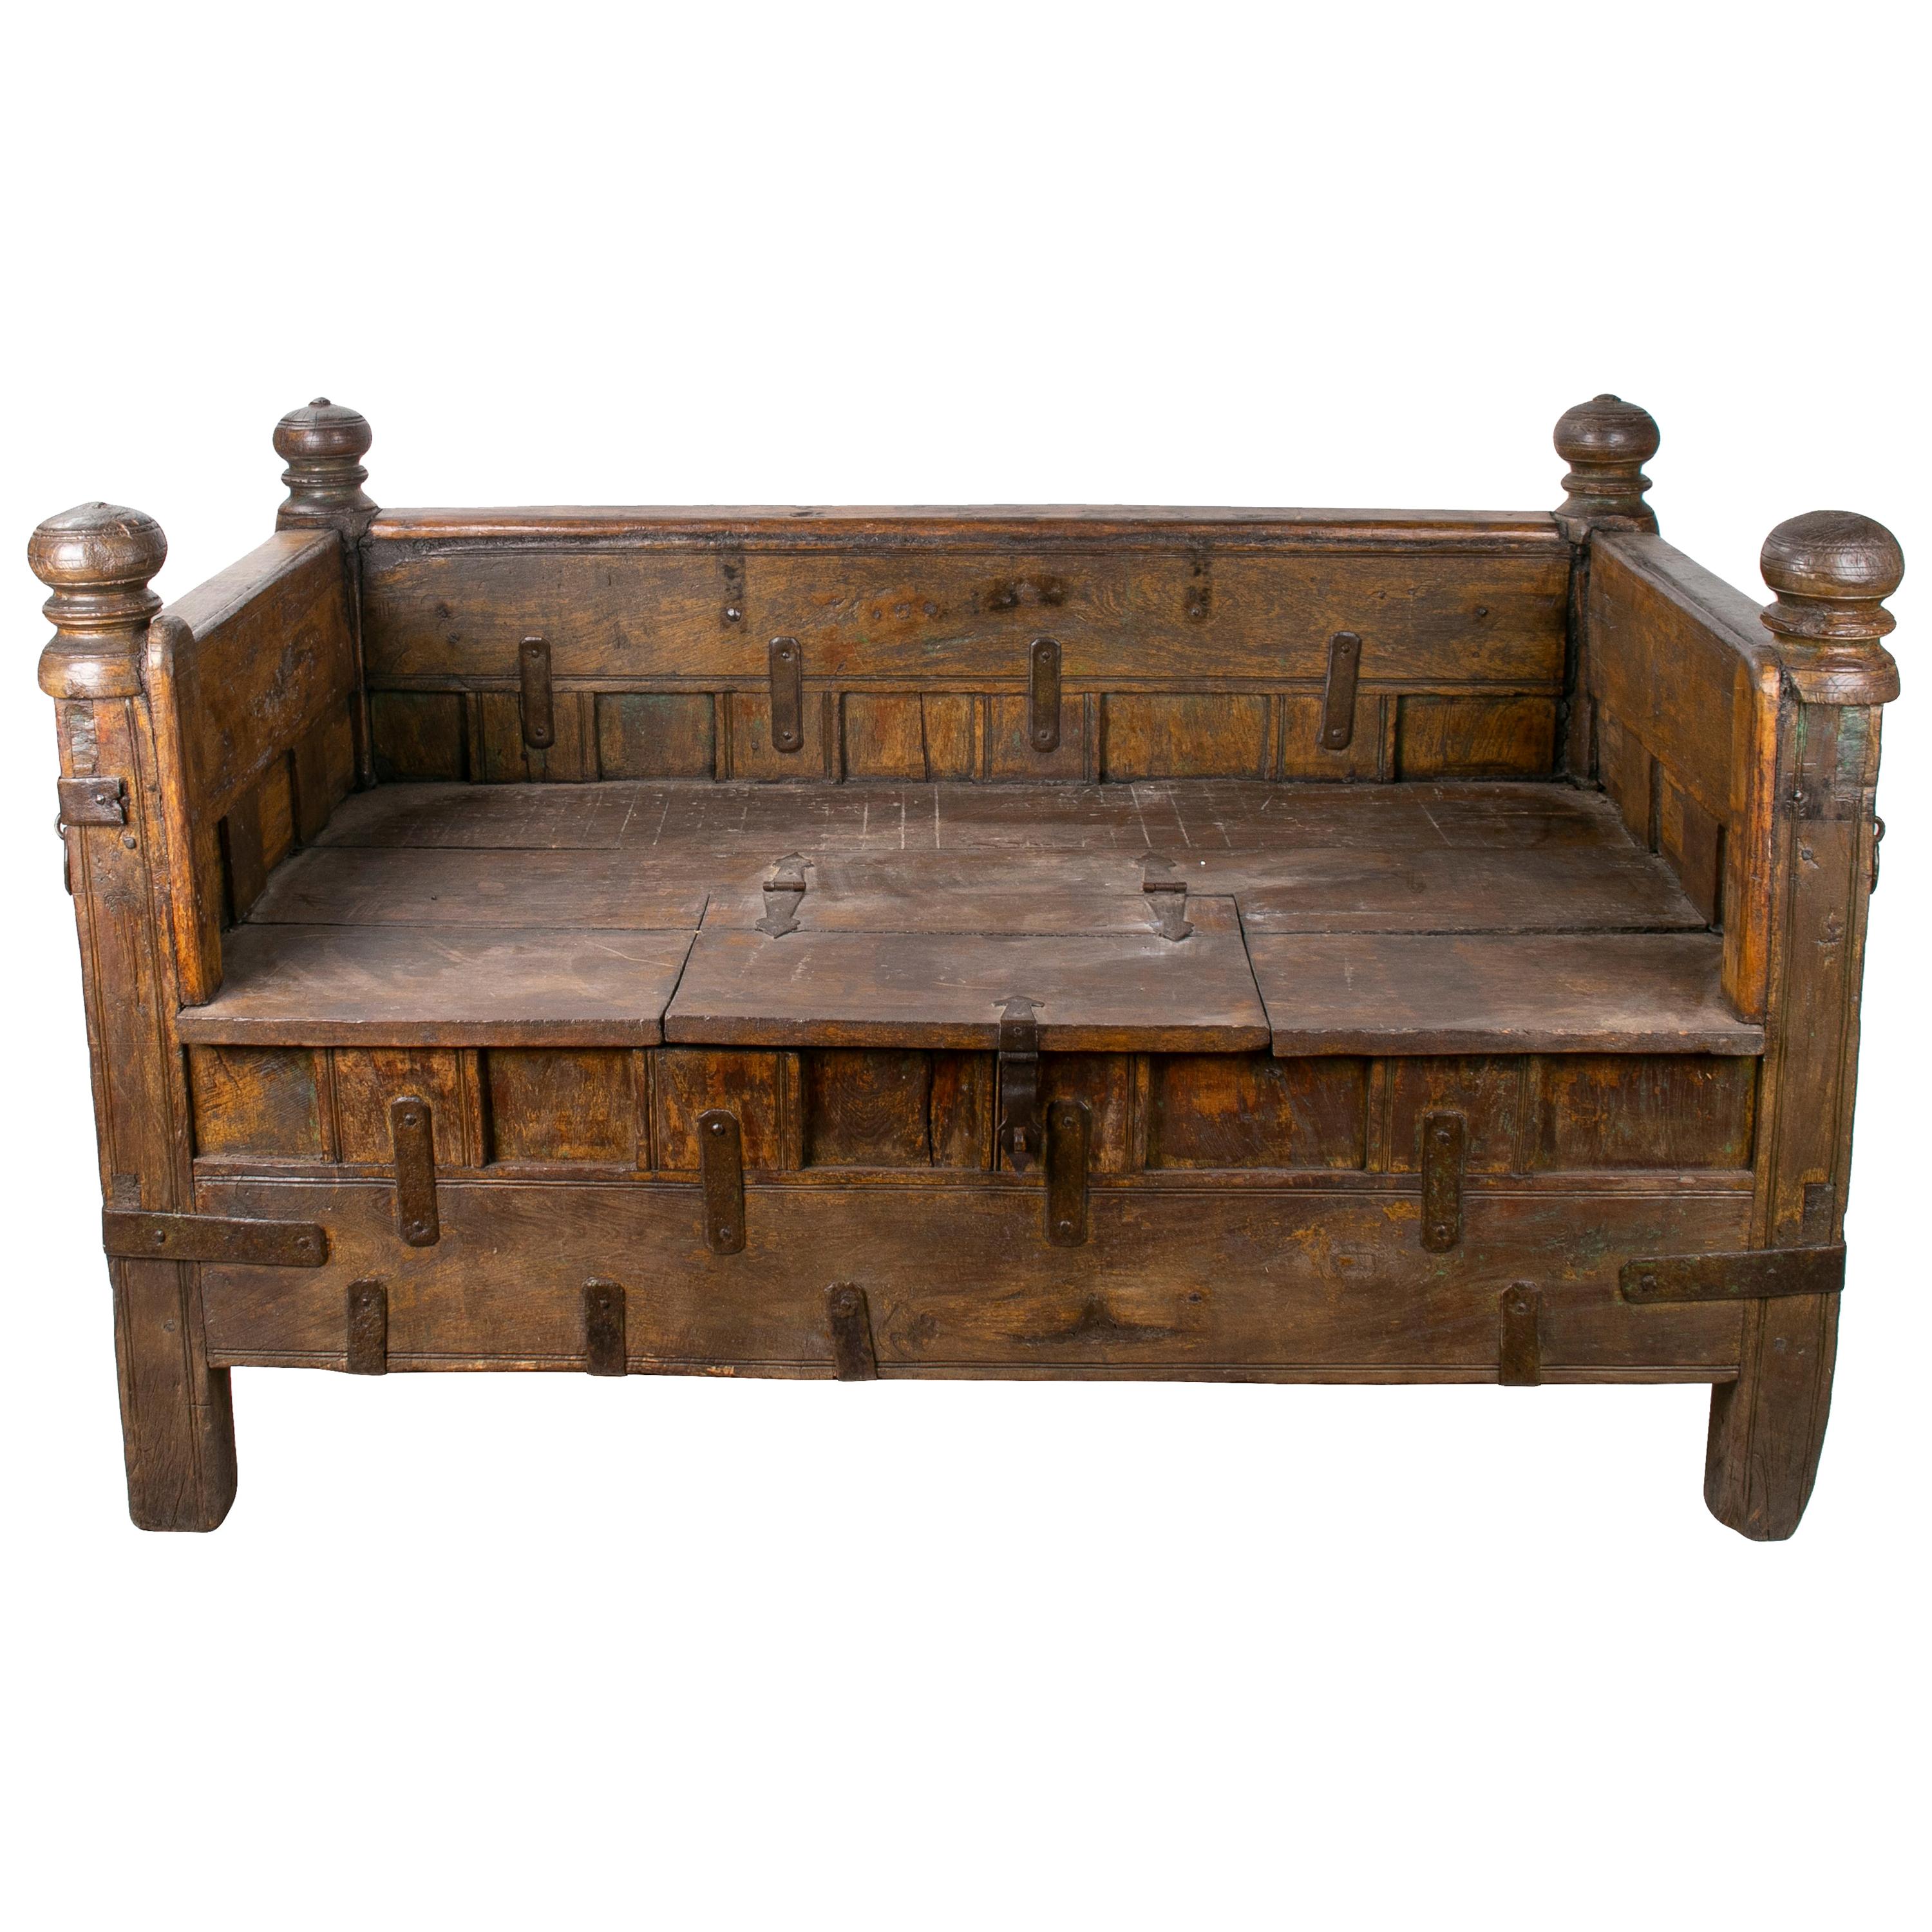 Indian Hand Carved Iron Bound Teak Bench with Hinged Seat